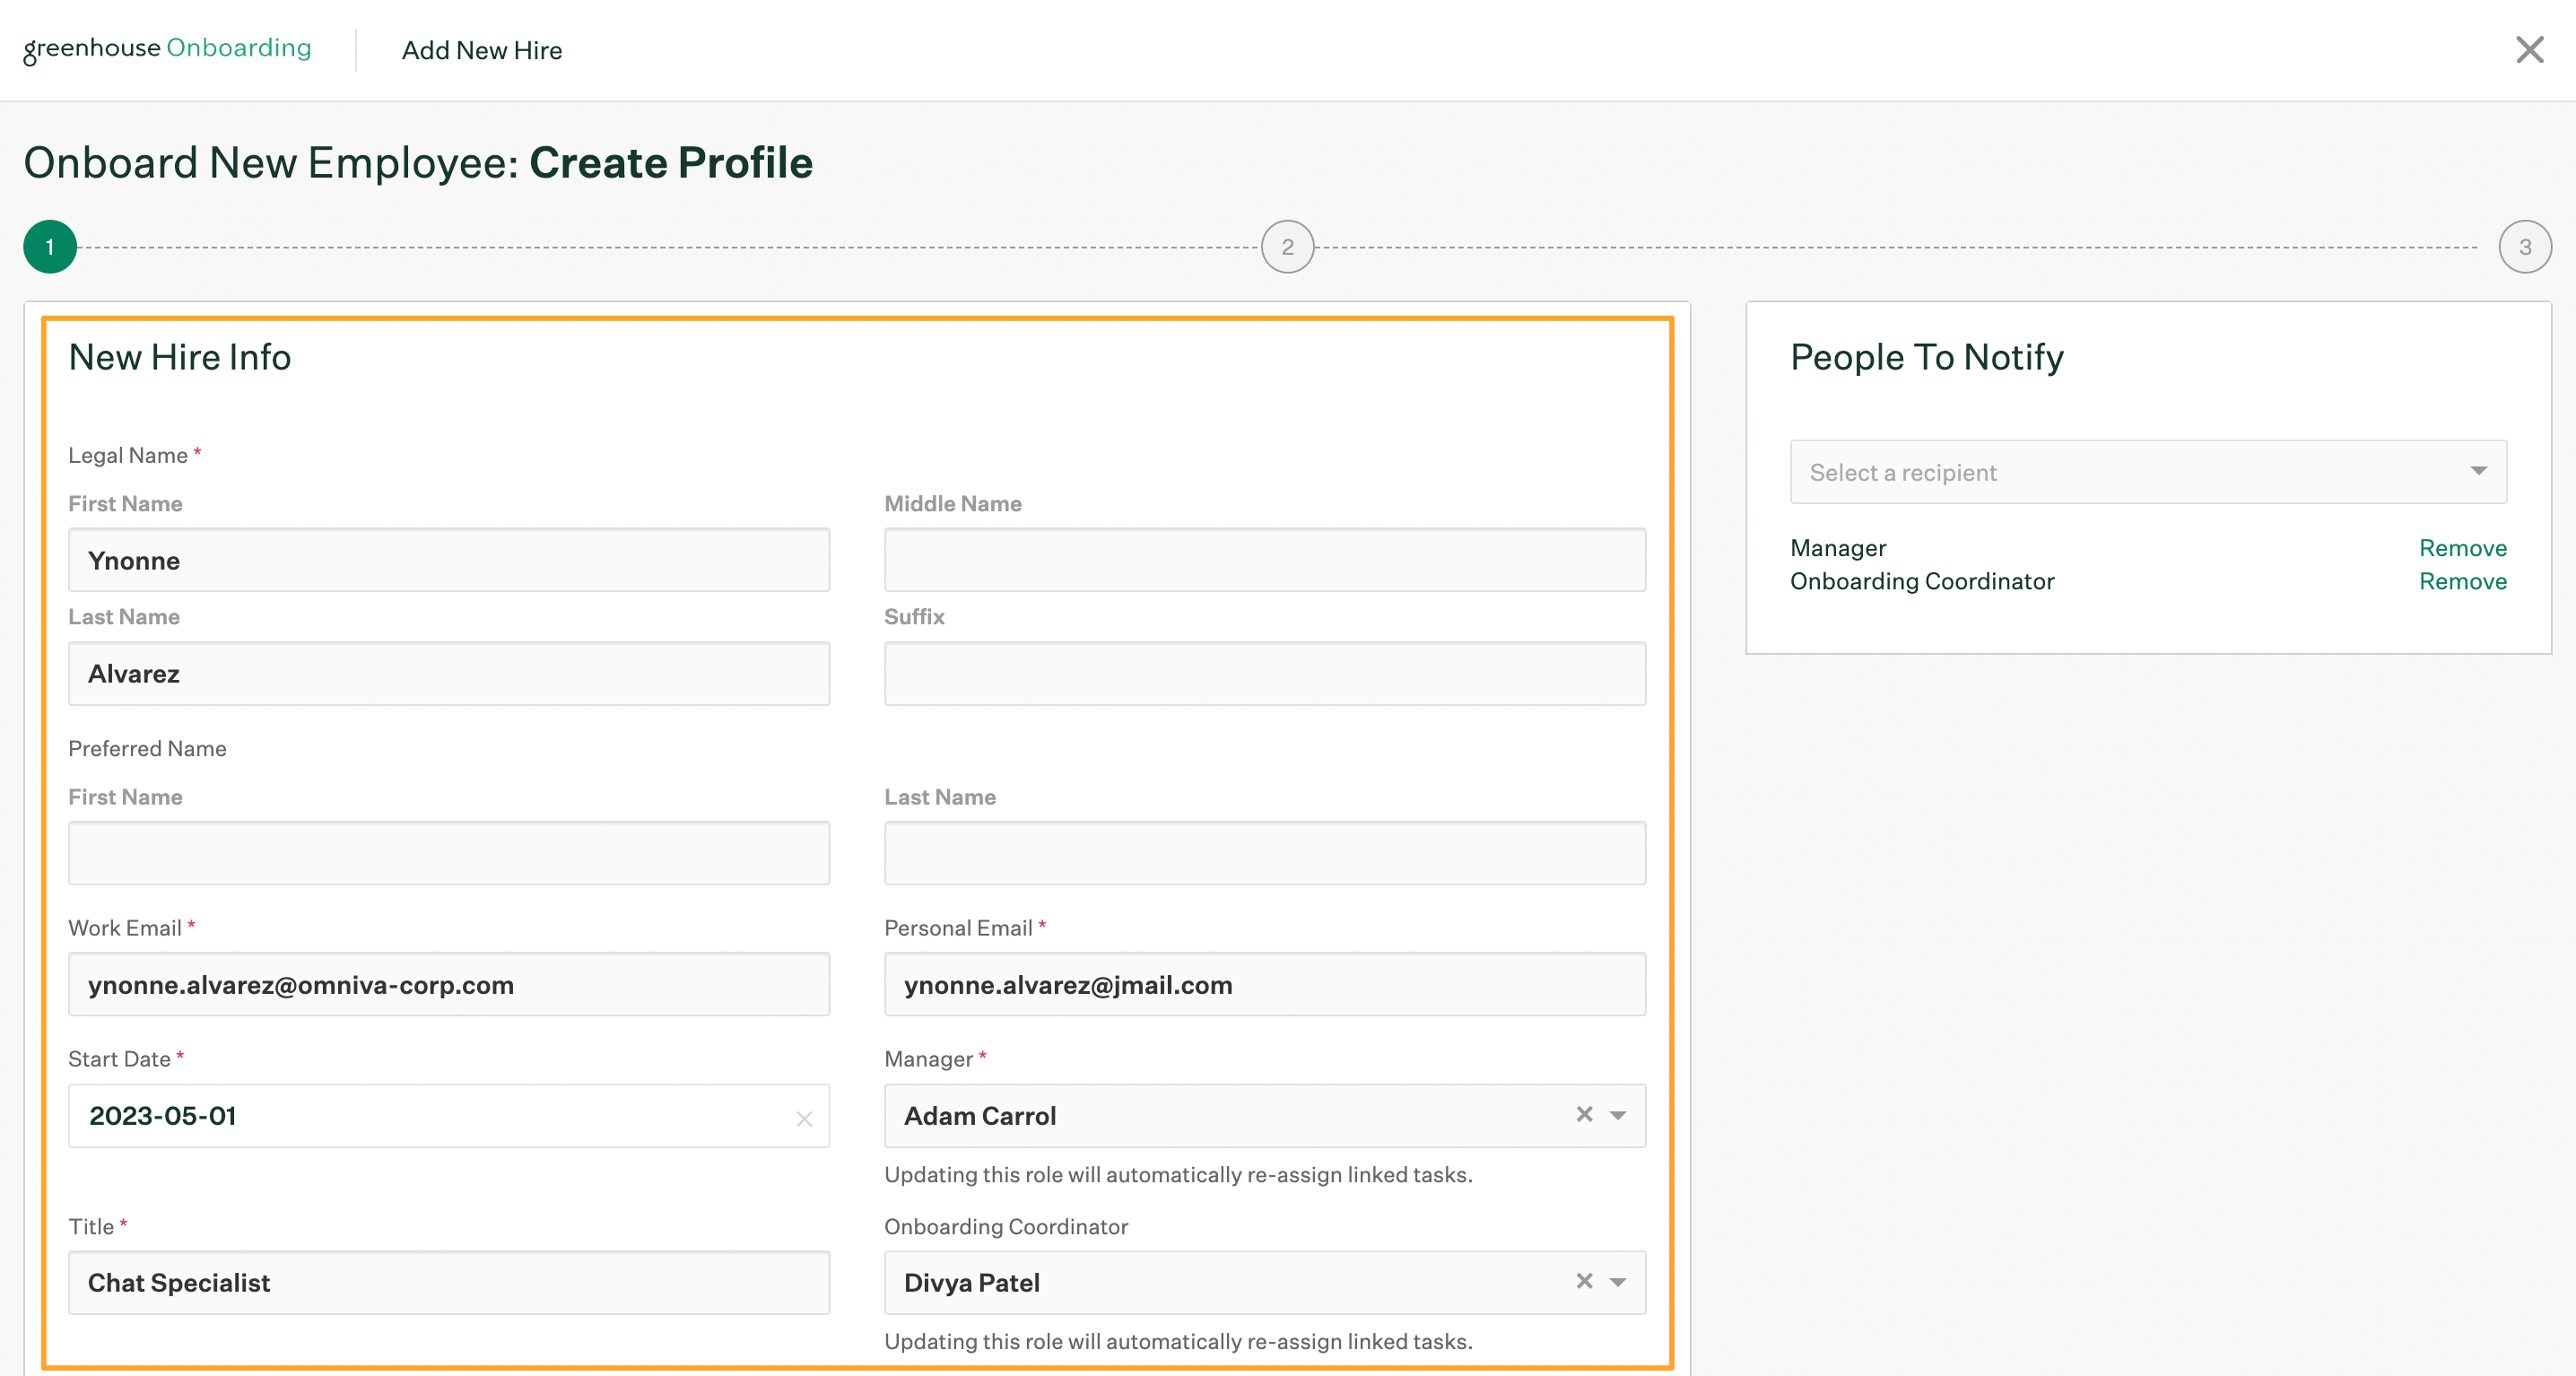 Onboard-new-employee-create-profile-page-with-new-hire-info-fields-highlighted-and-filled-out.png